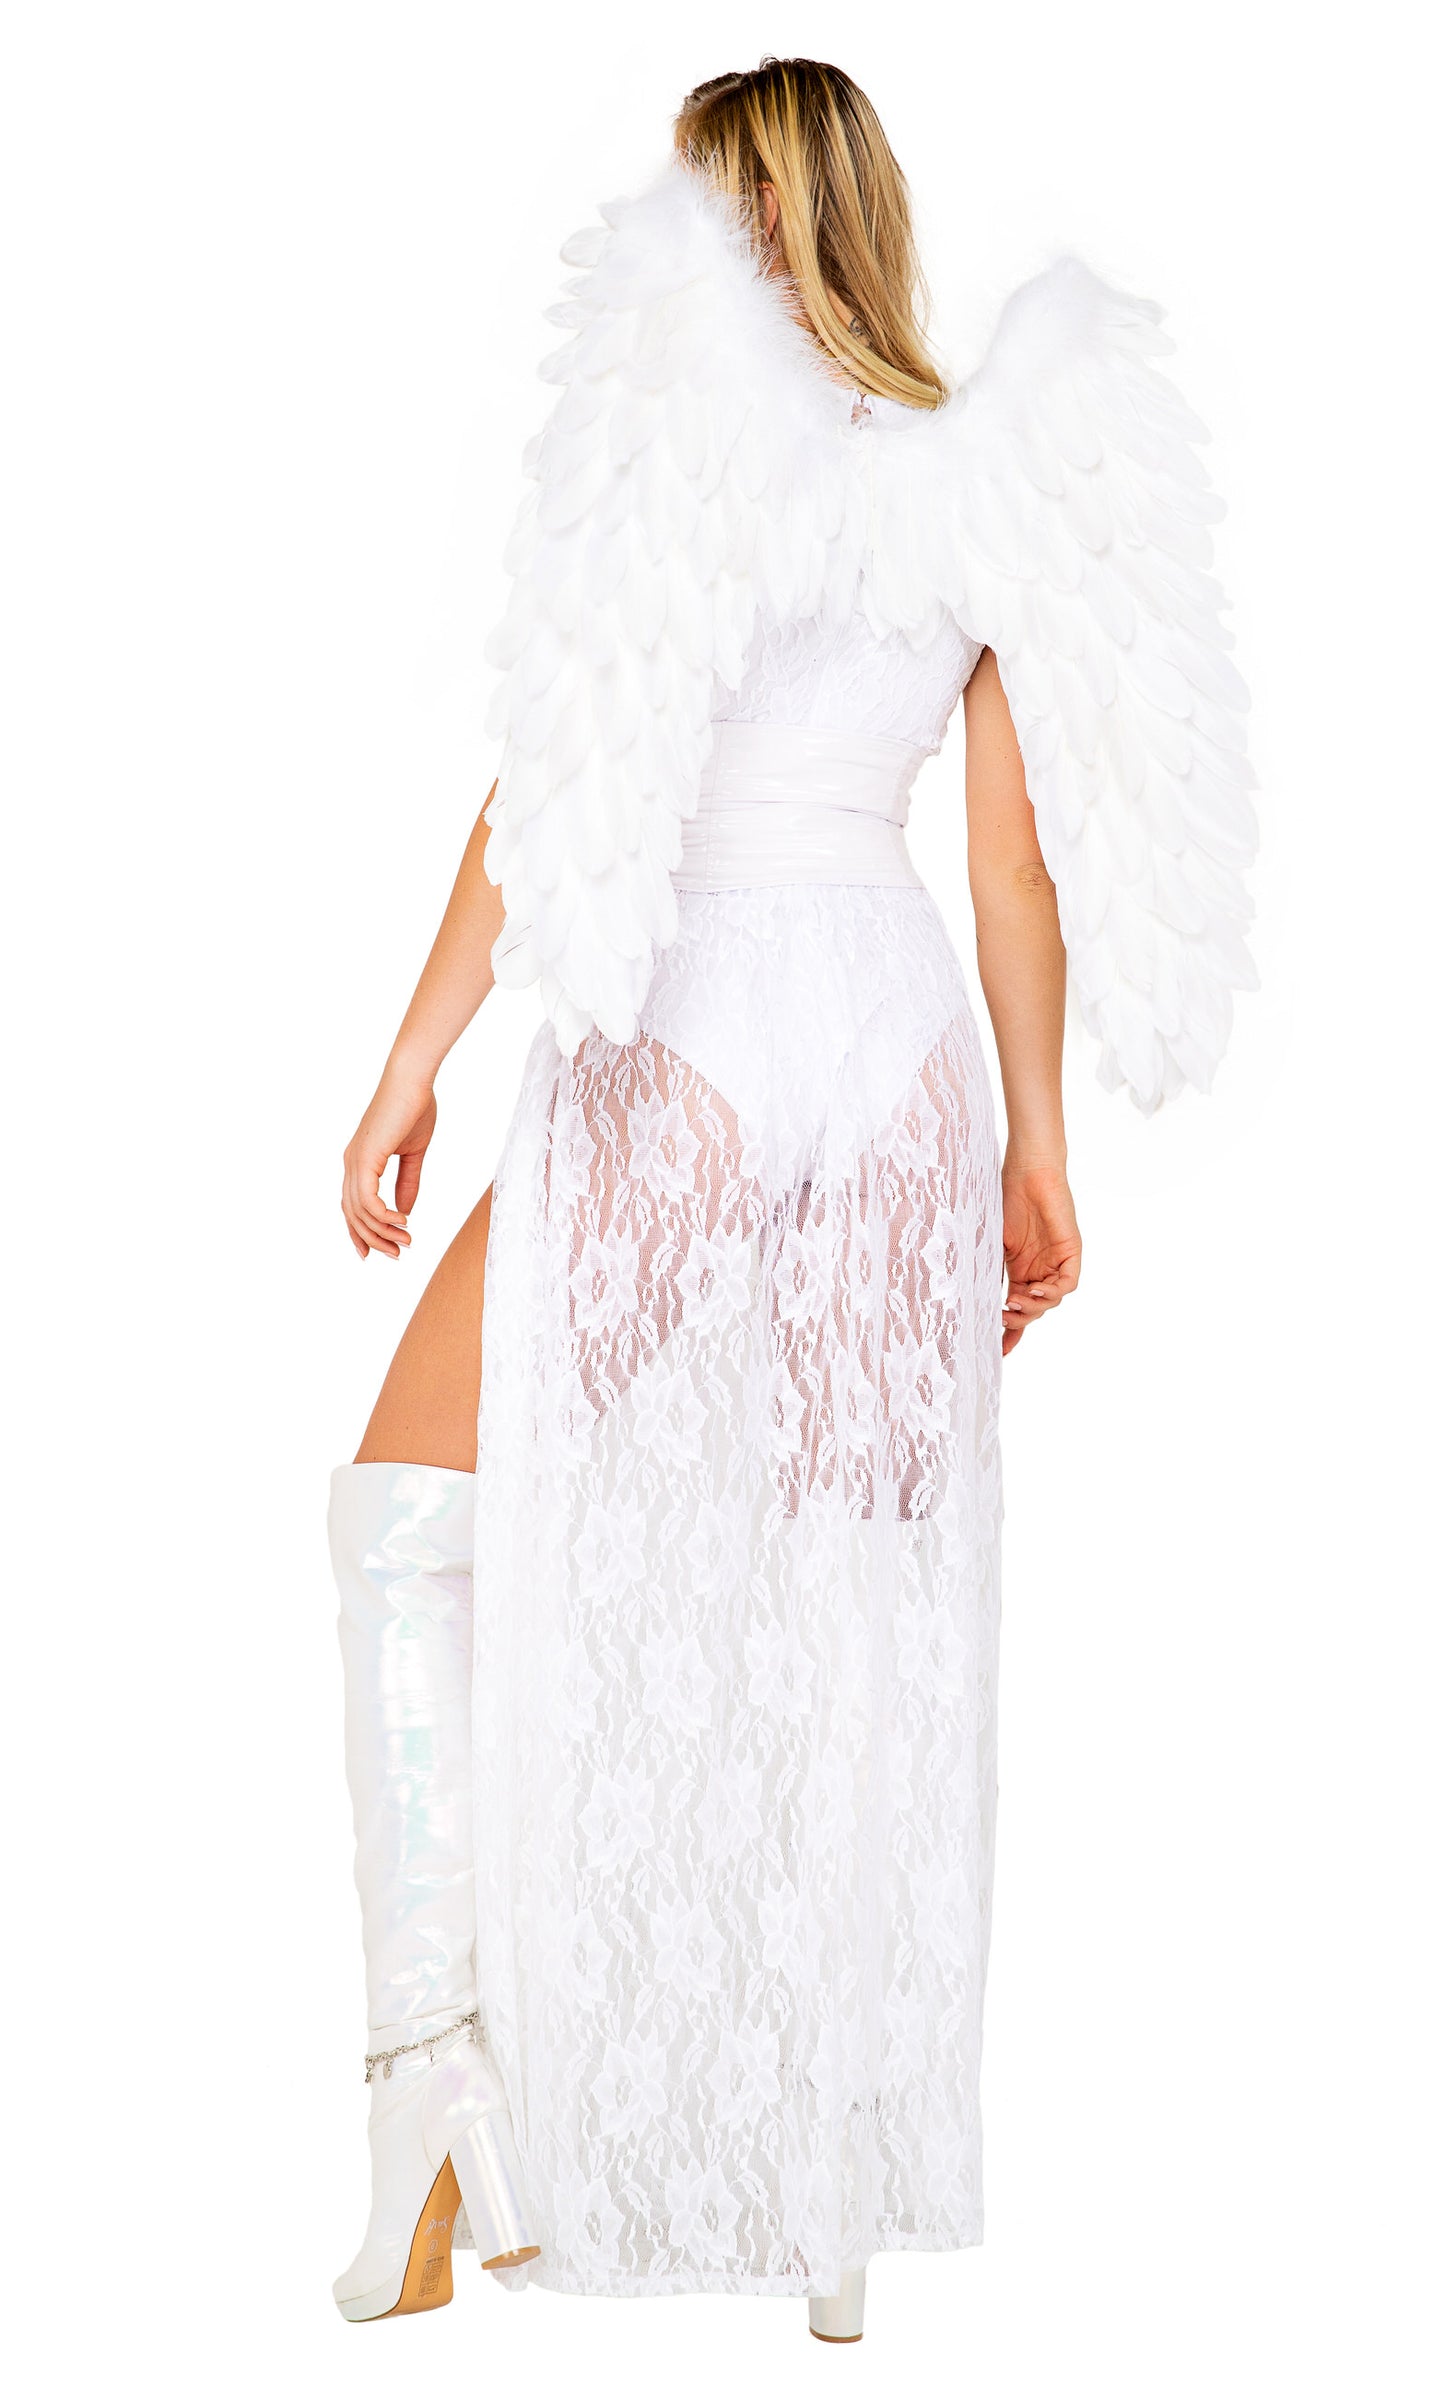 Heavenly Kiss Angel Costume by ROMA in Size S, M, or L